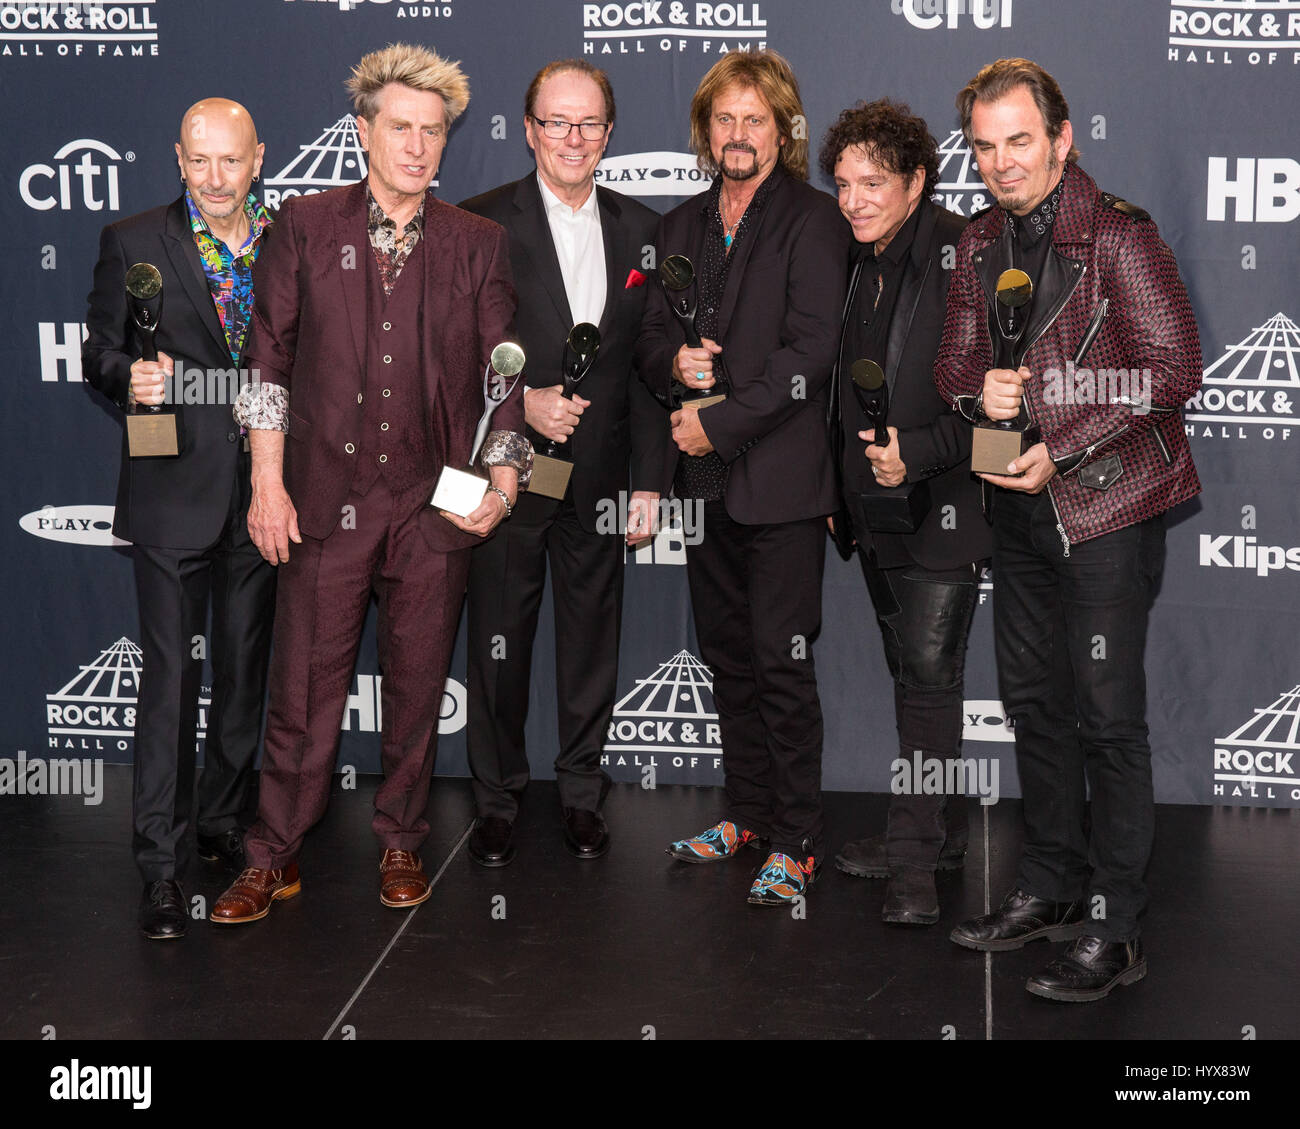 Brooklyn, New York, USA. 7th Apr, 2017. STEVE SMITH, ROSS VALORY, AYNSLEY DUNBAR, GREGG ROLLIE, NEAL SCHON and JONATHAN CAIN of Journey walk the red carpet at Barclay's Center during the Hall of Fame Induction ceremony in Brooklyn, New York Credit: Daniel DeSlover/ZUMA Wire/Alamy Live News Stock Photo